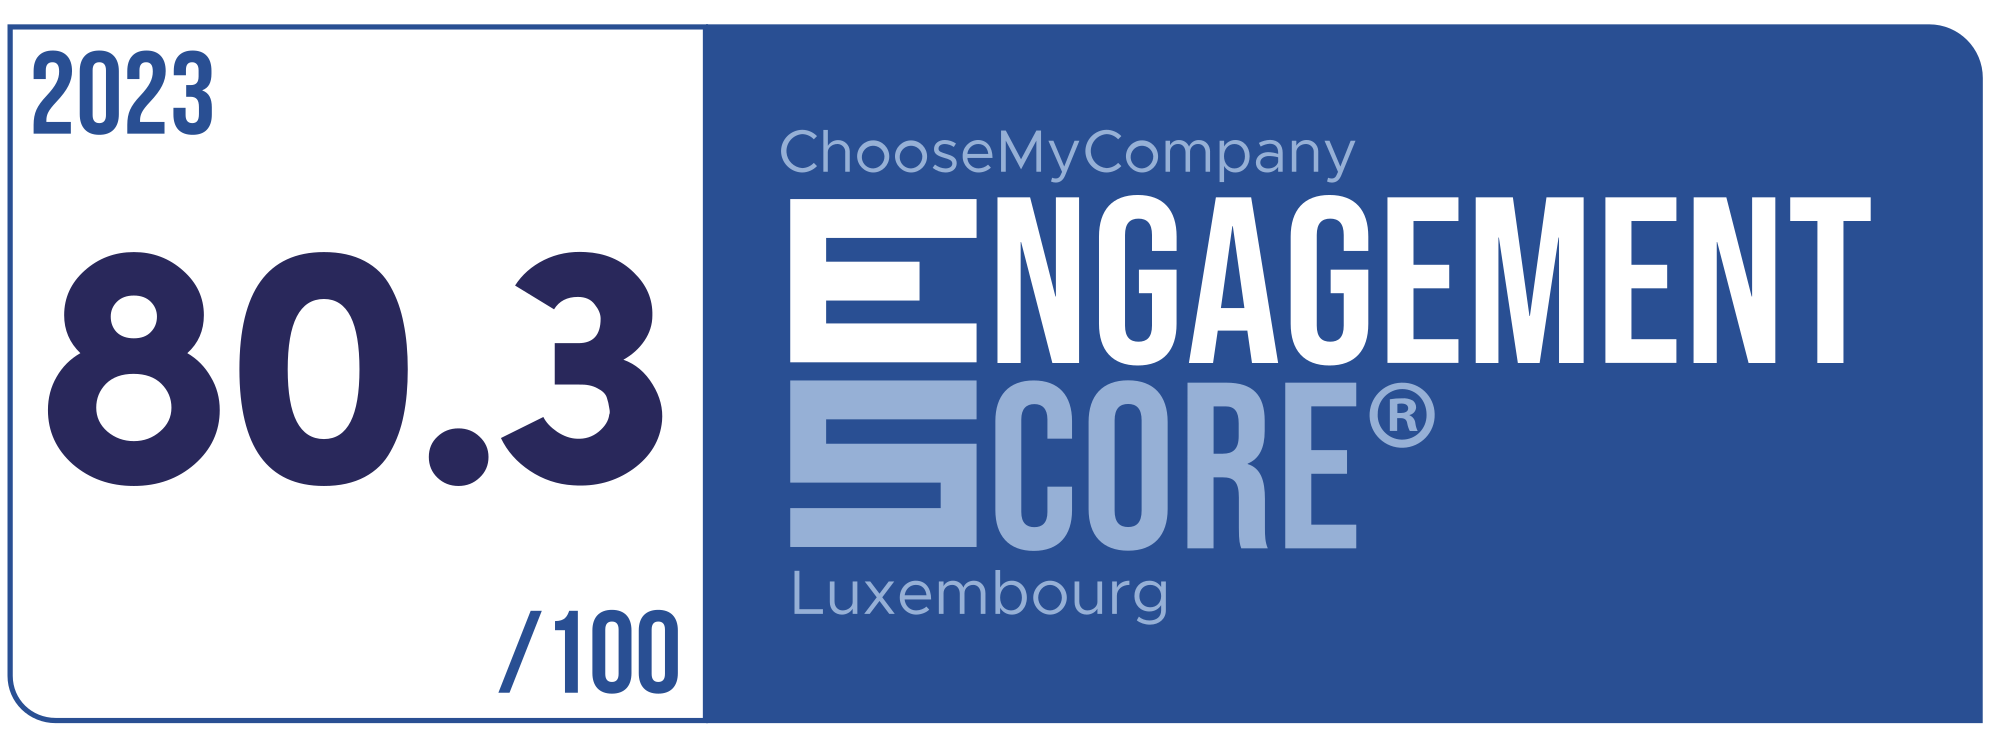 Label Engagement Score 2023 Luxembourg